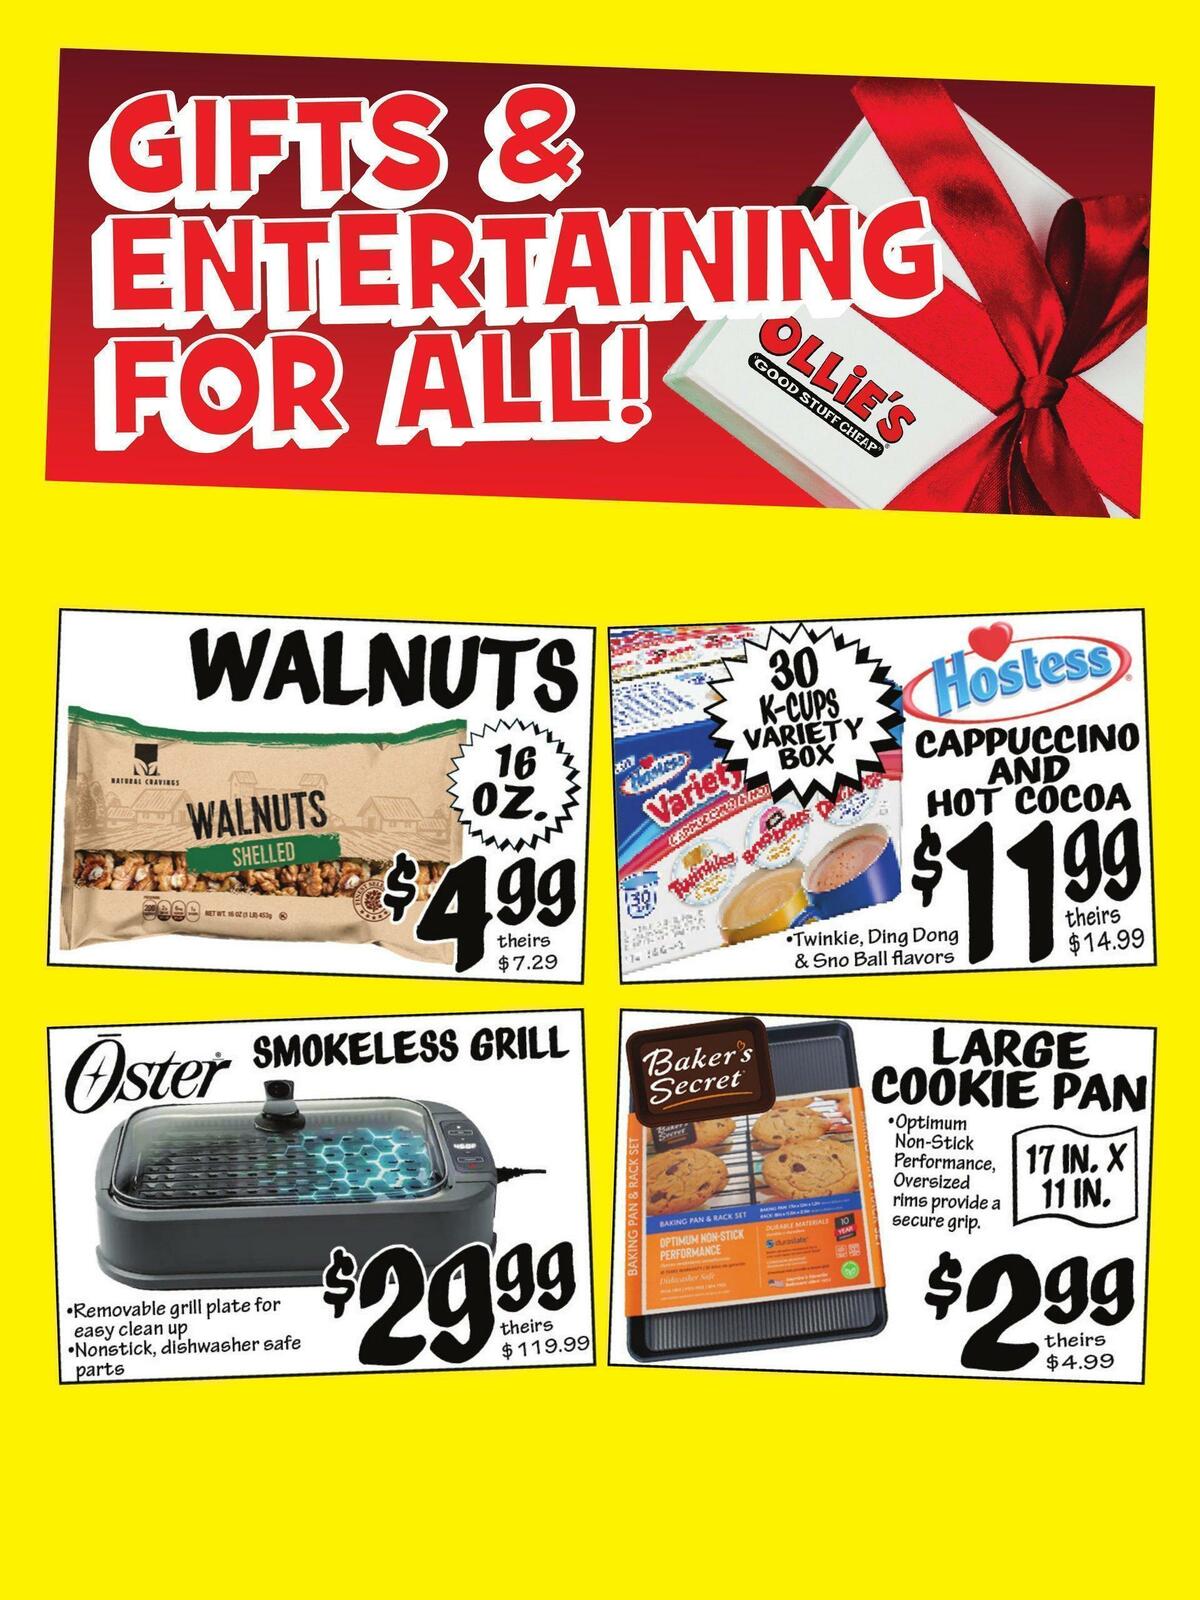 Ollie's Bargain Outlet Heater Weekly Ad from December 22